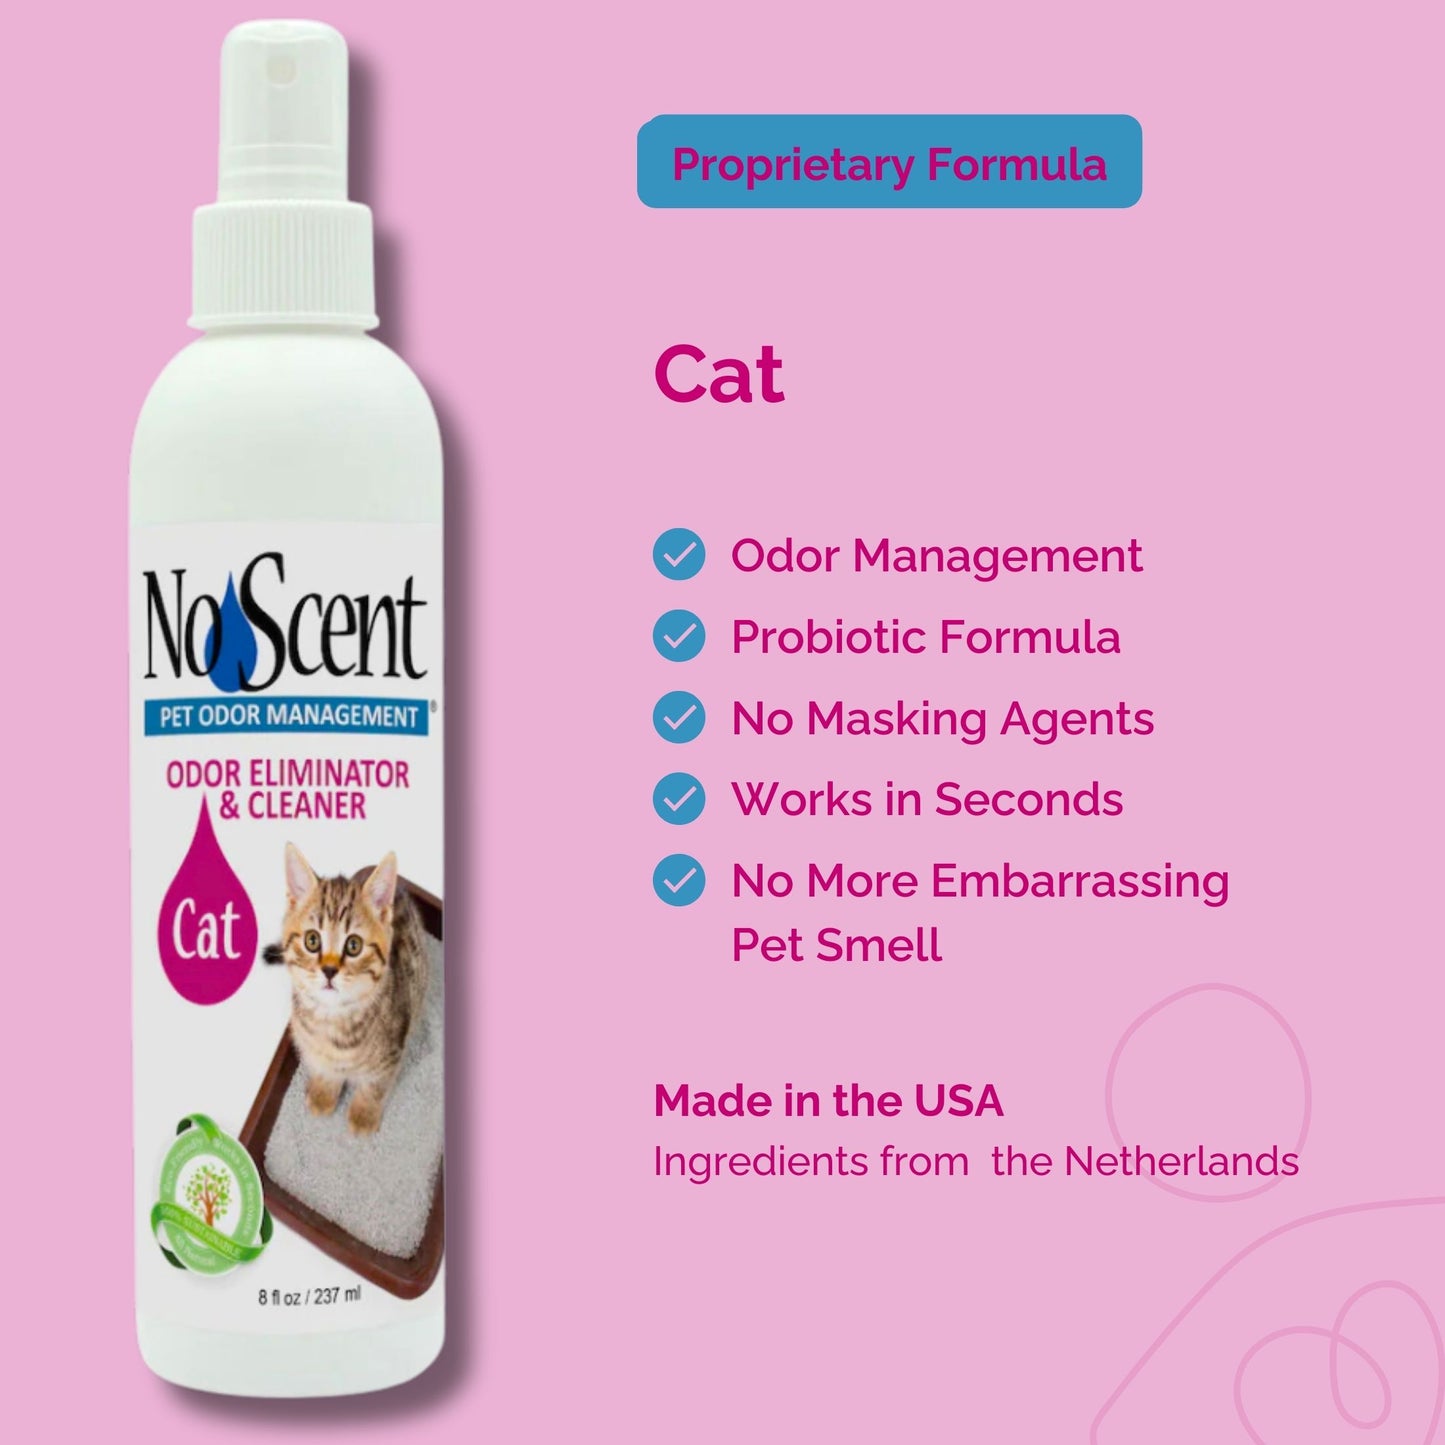 No Scent Cat Litter Box Cleaner for Odor & Stains, Daily Freshener for Surfaces, Furniture, Carpet, Fabric & Car Interior